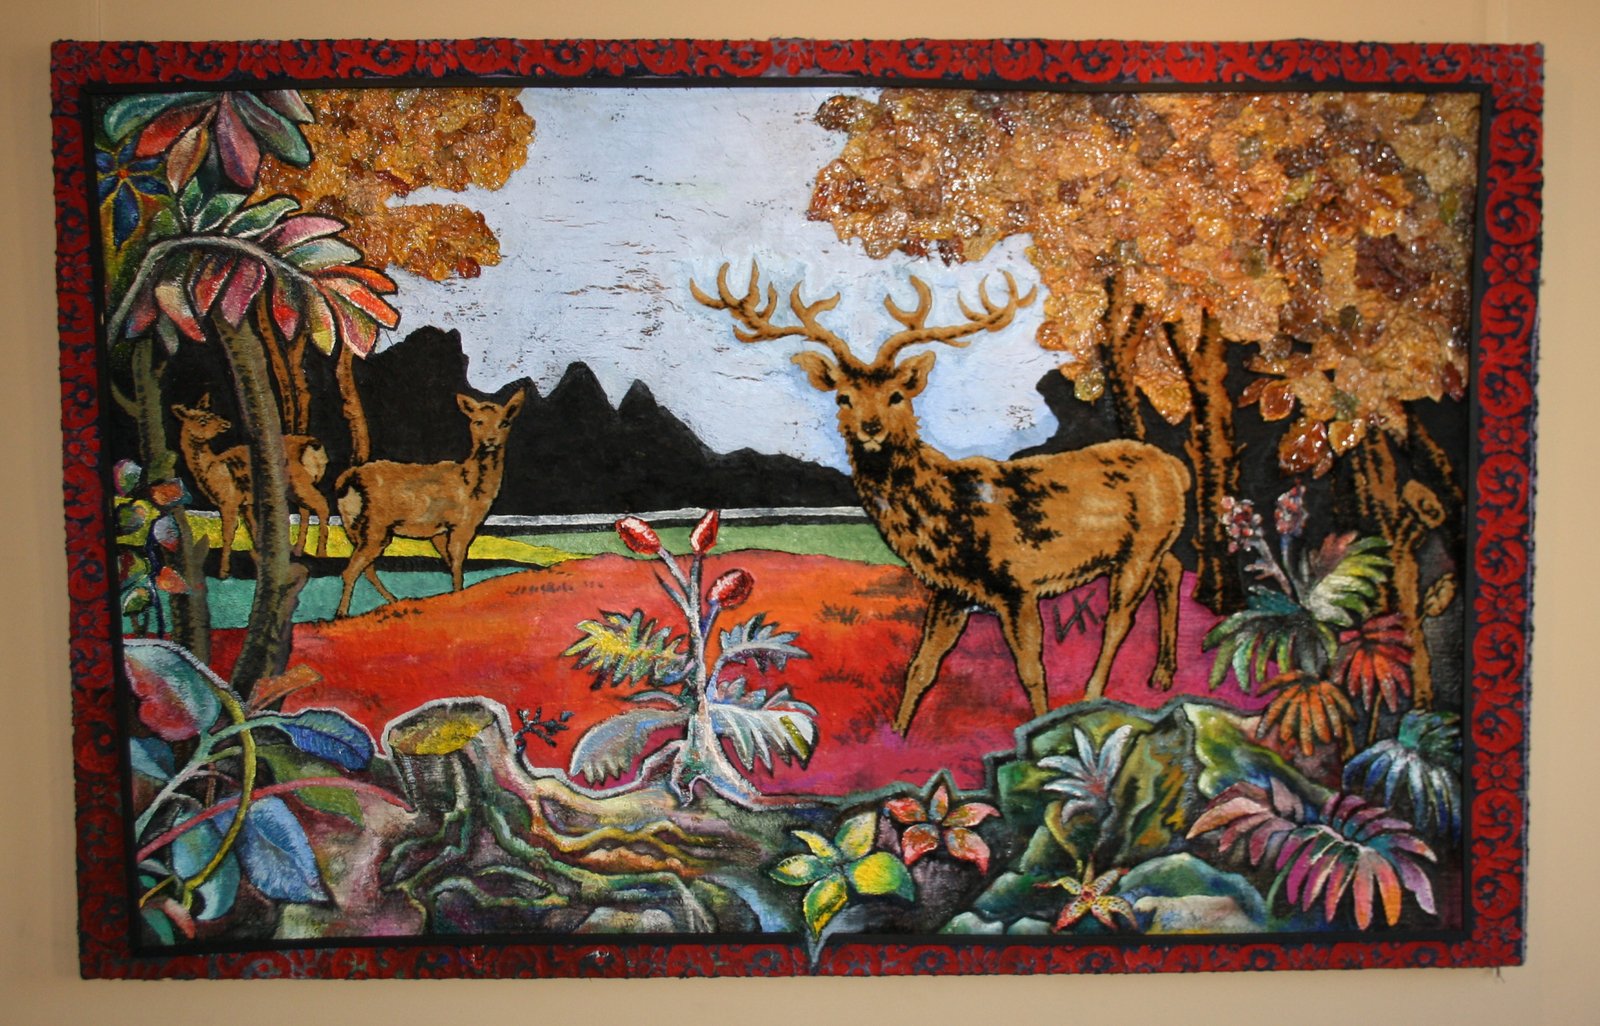 Ivan Klyuchnikov, Deer at an Exhibition, 2014, carpet, mixed media. Private collection